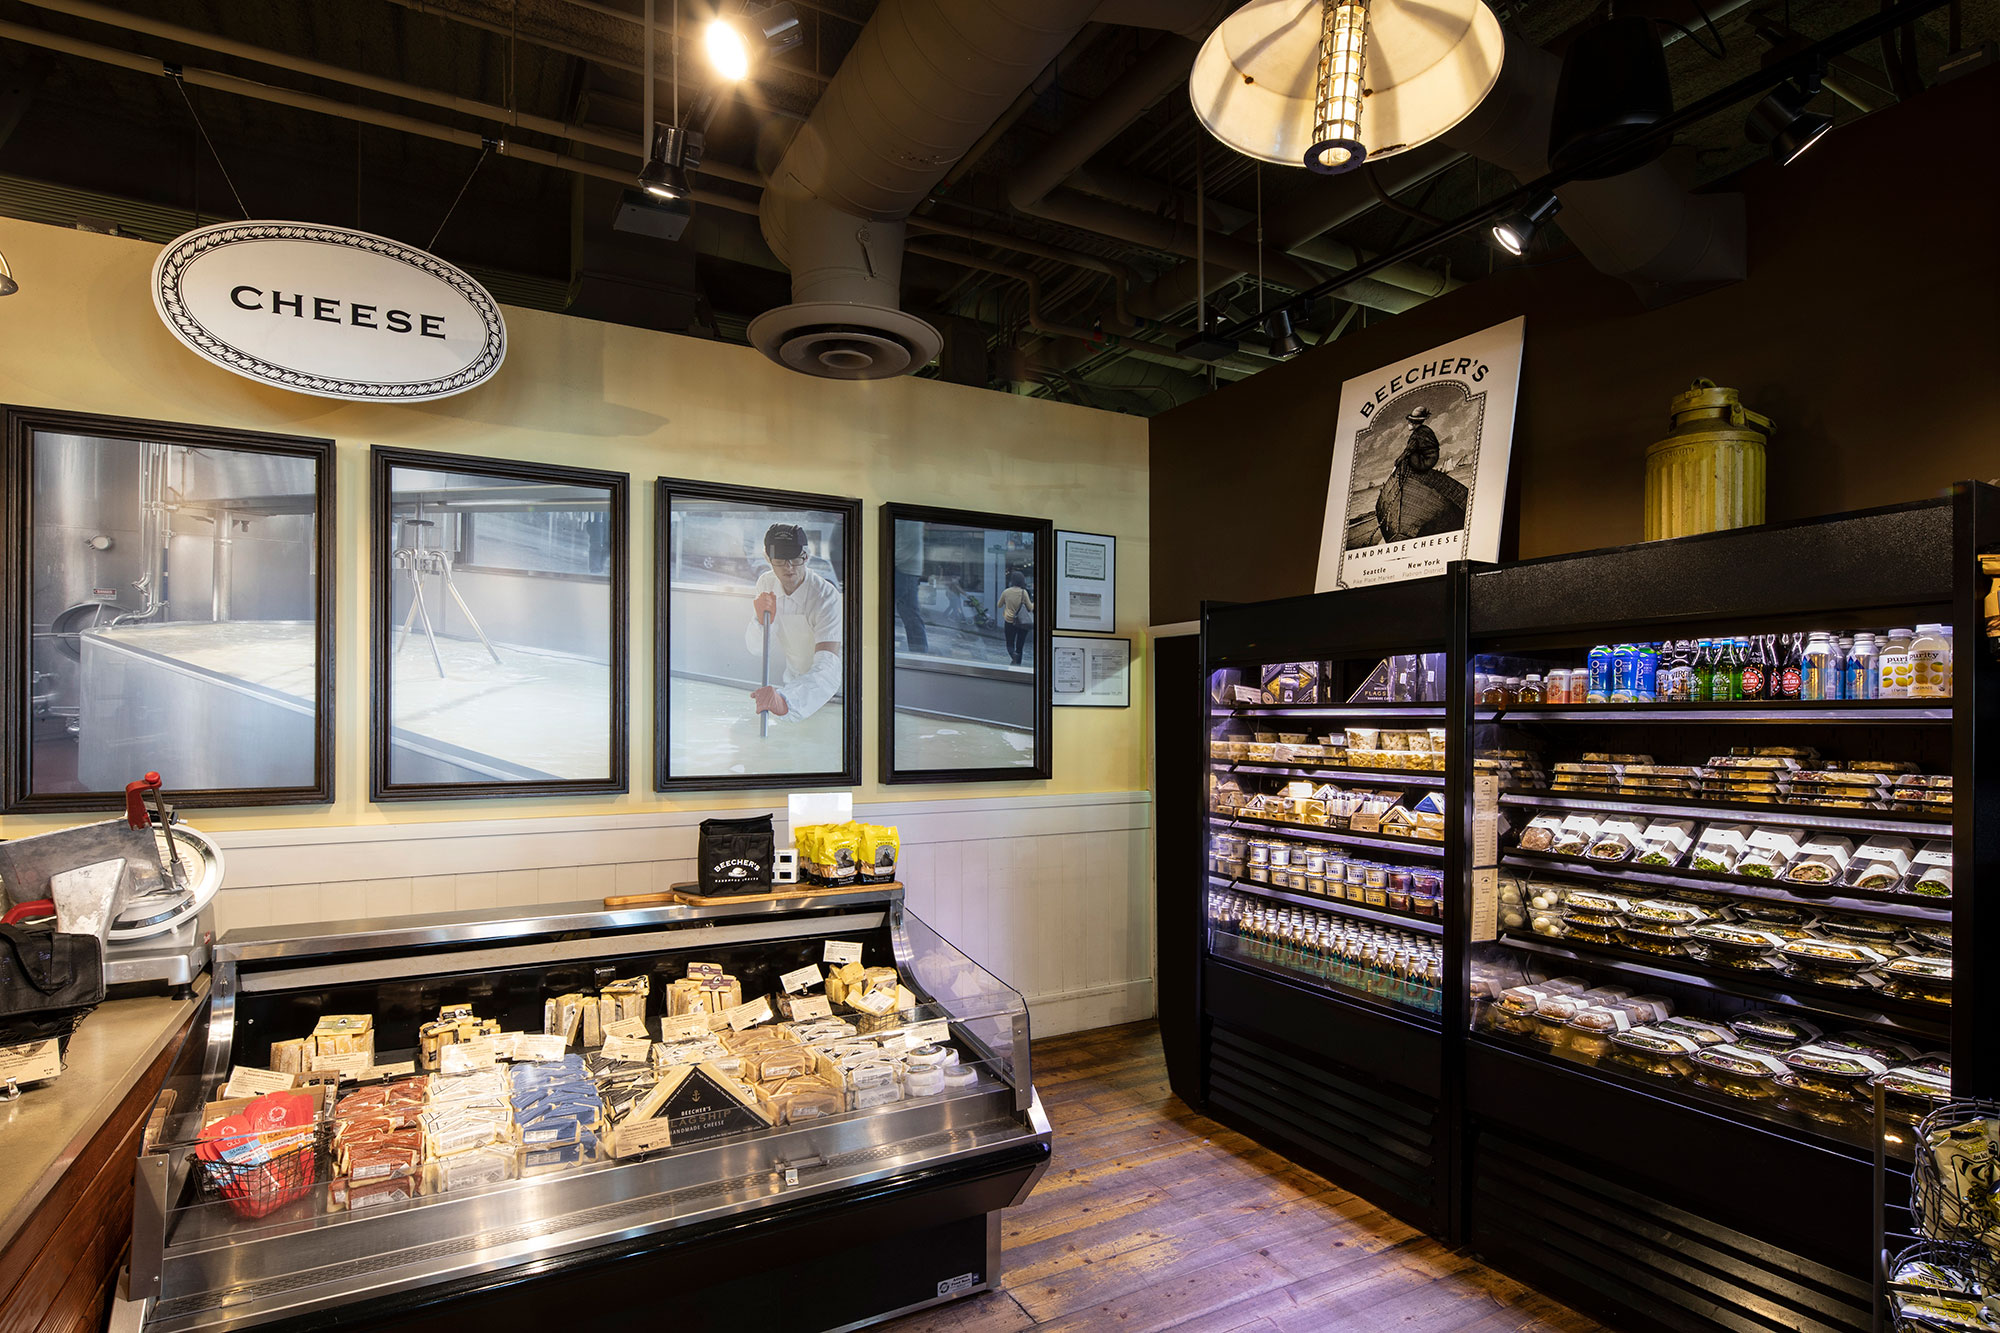 SEA Beecher's Handmade Cheese Interior with Grab-and-Go and Cheese Case